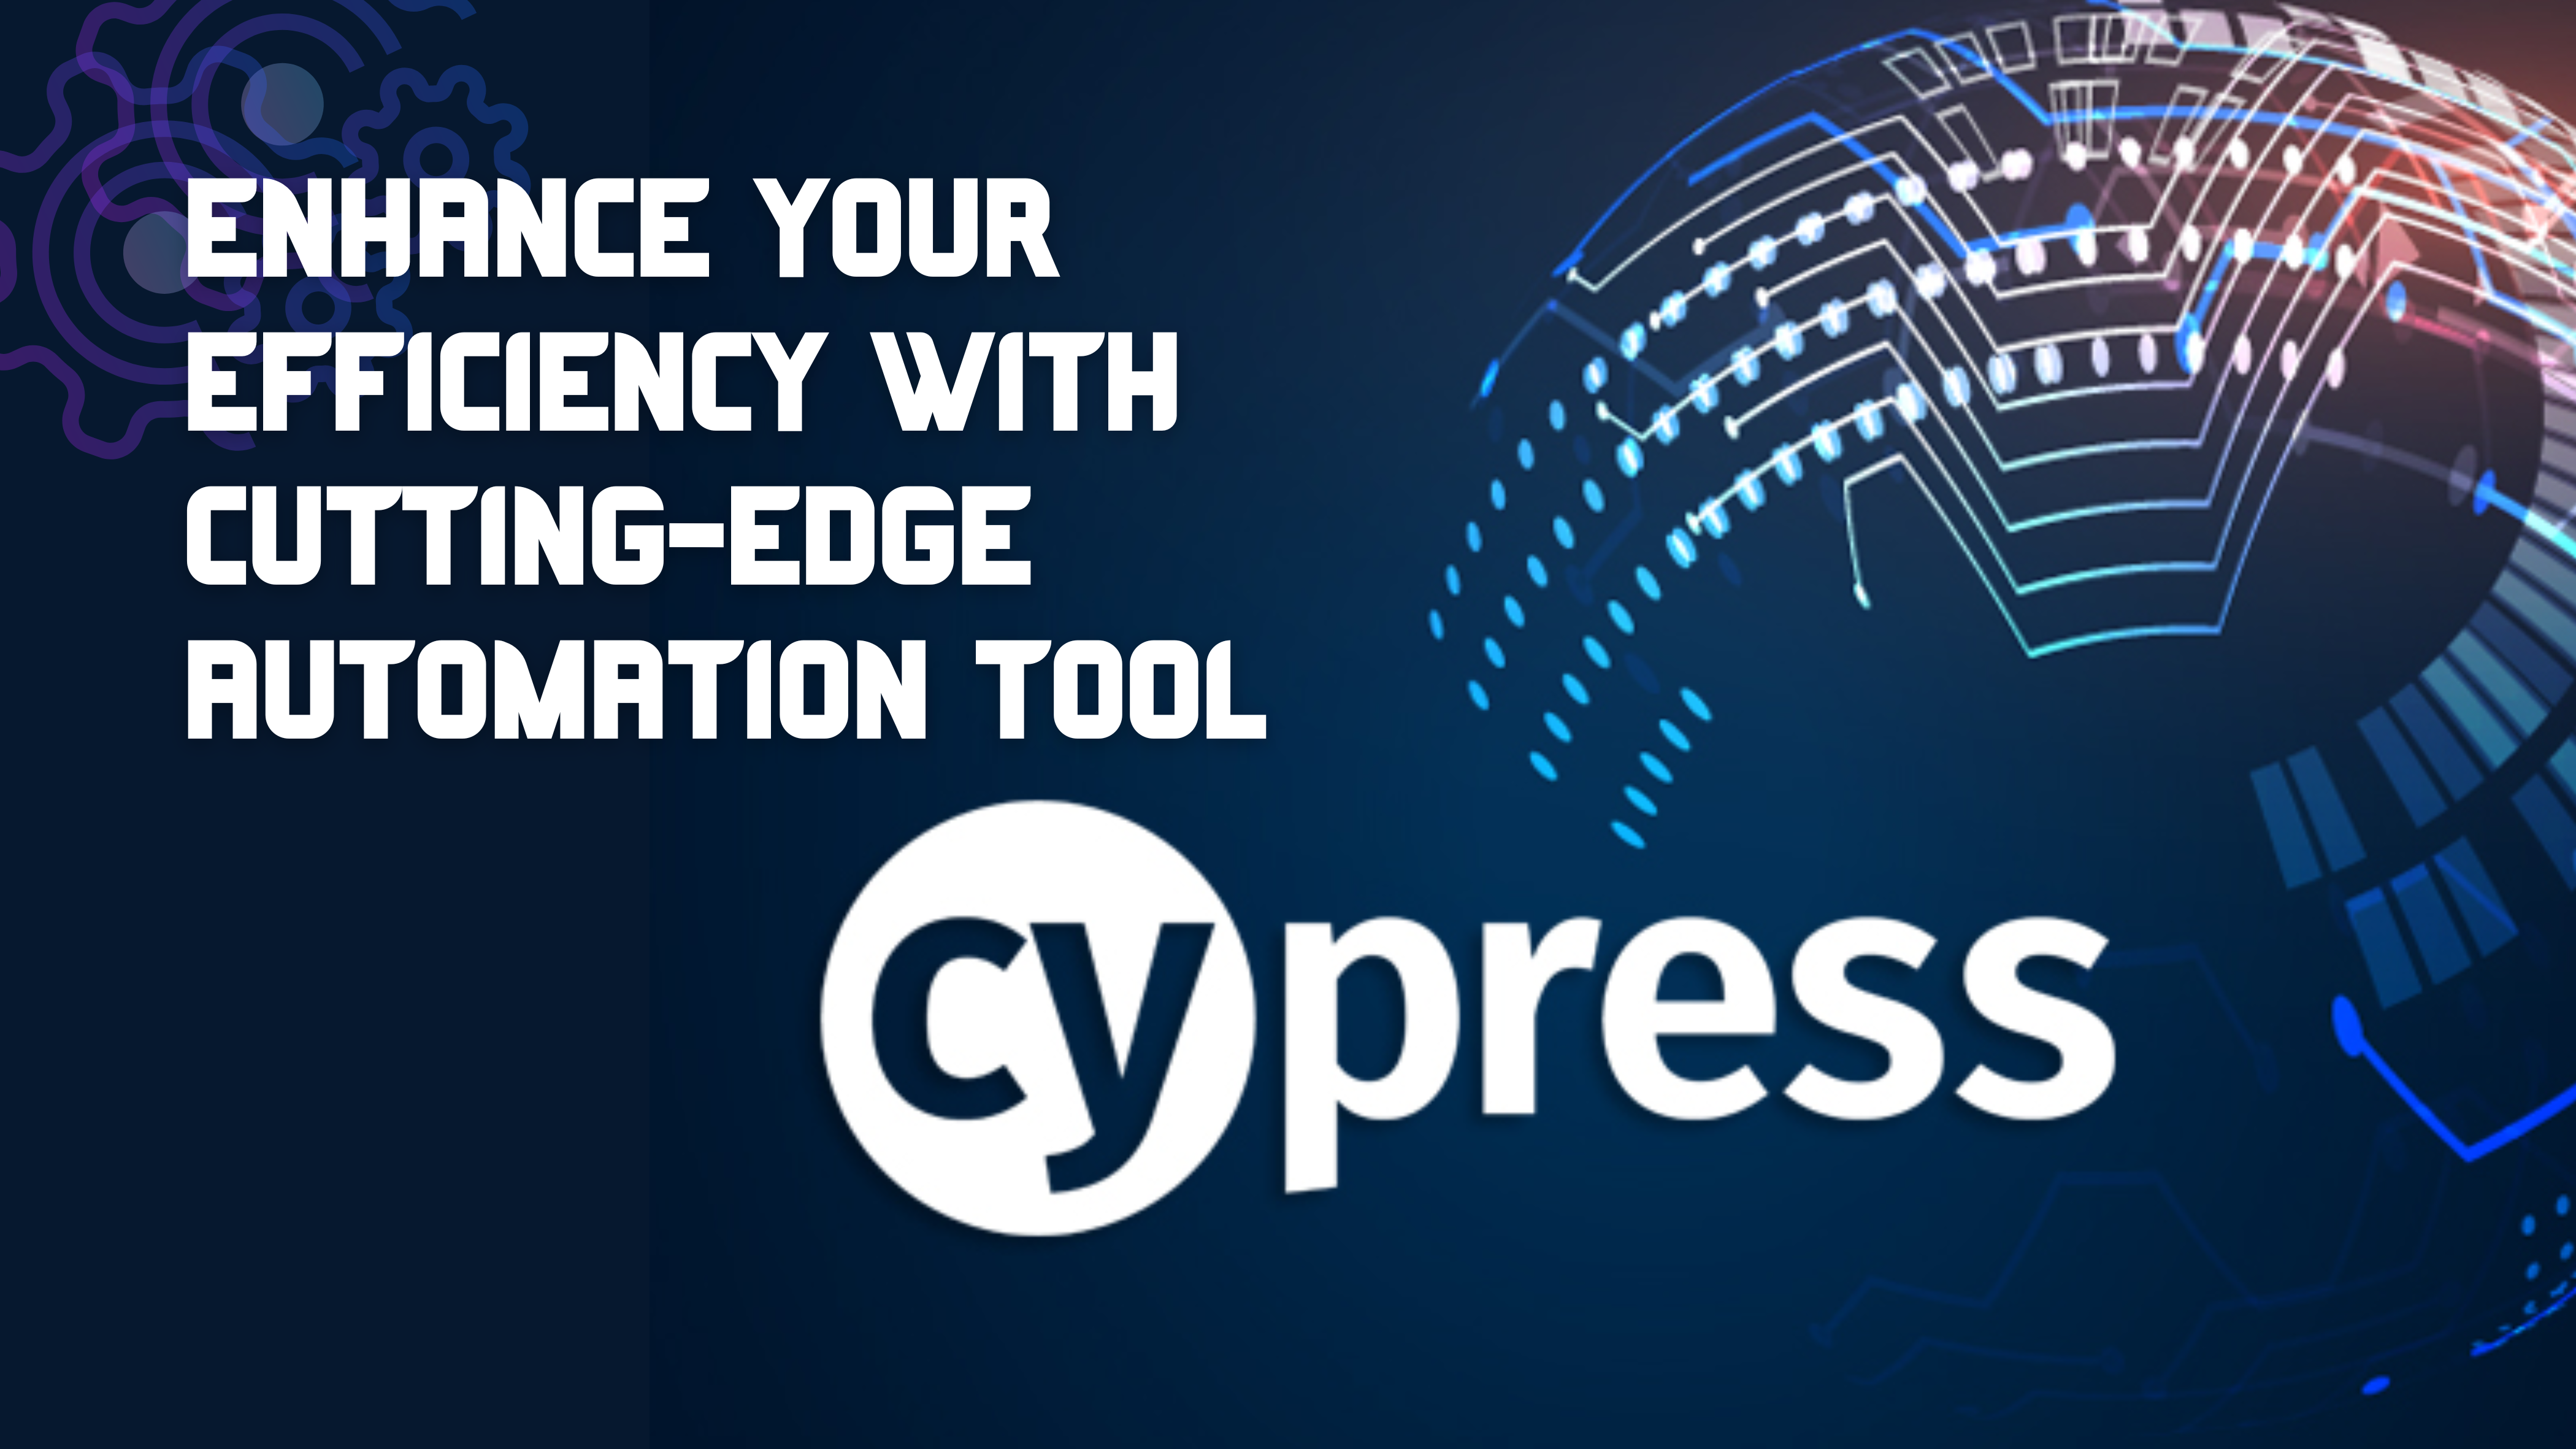 Enhance Your Efficiency with Cutting-Edge Automation tool Cypress